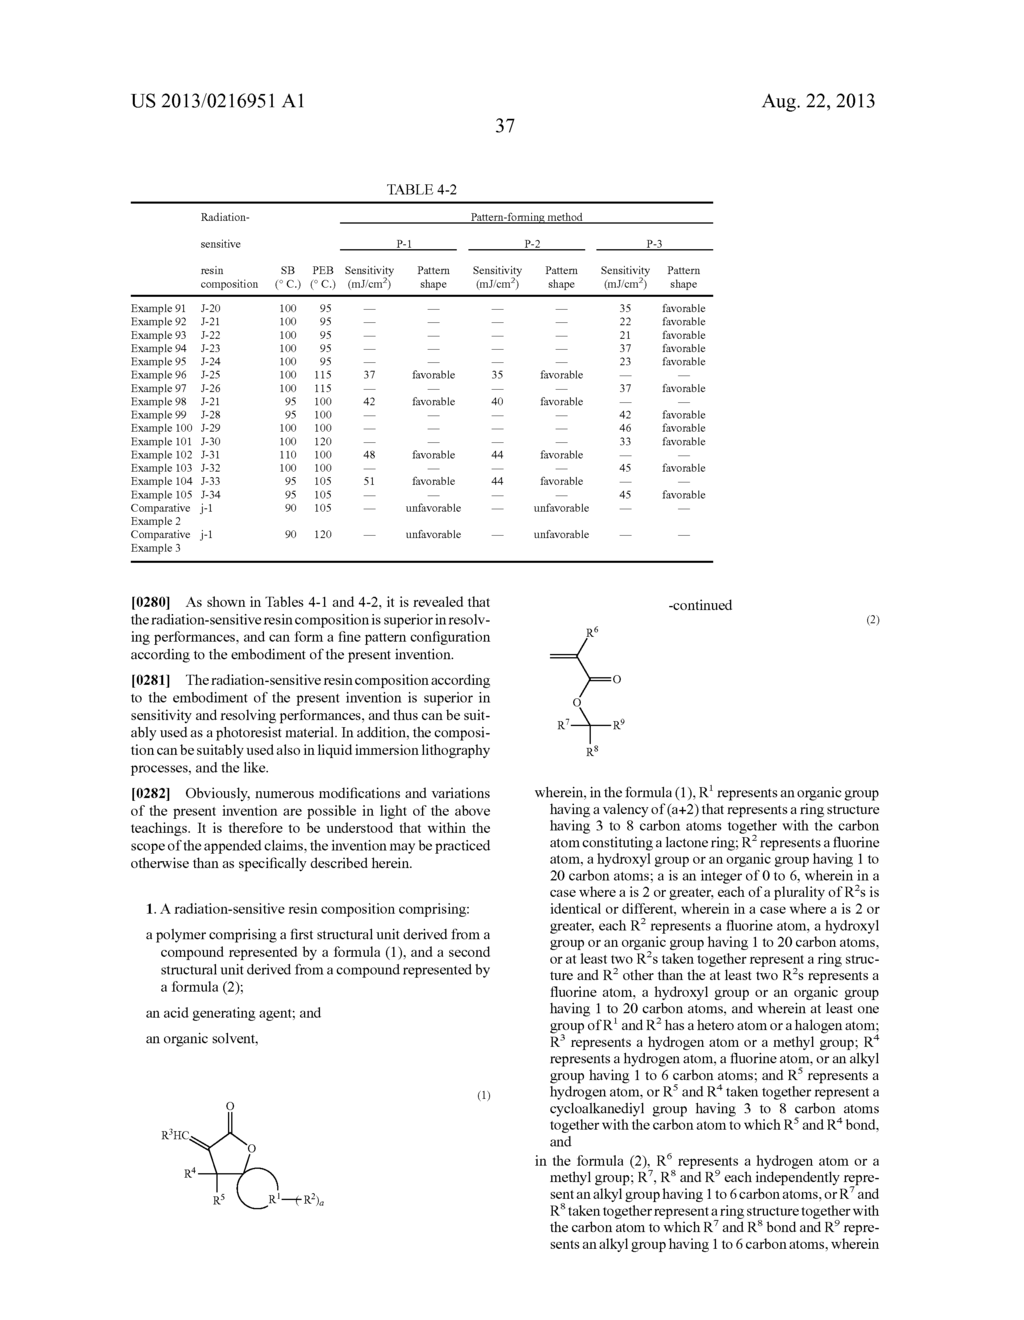 RADIATION-SENSITIVE RESIN COMPOSITION, POLYMER AND COMPOUND - diagram, schematic, and image 38